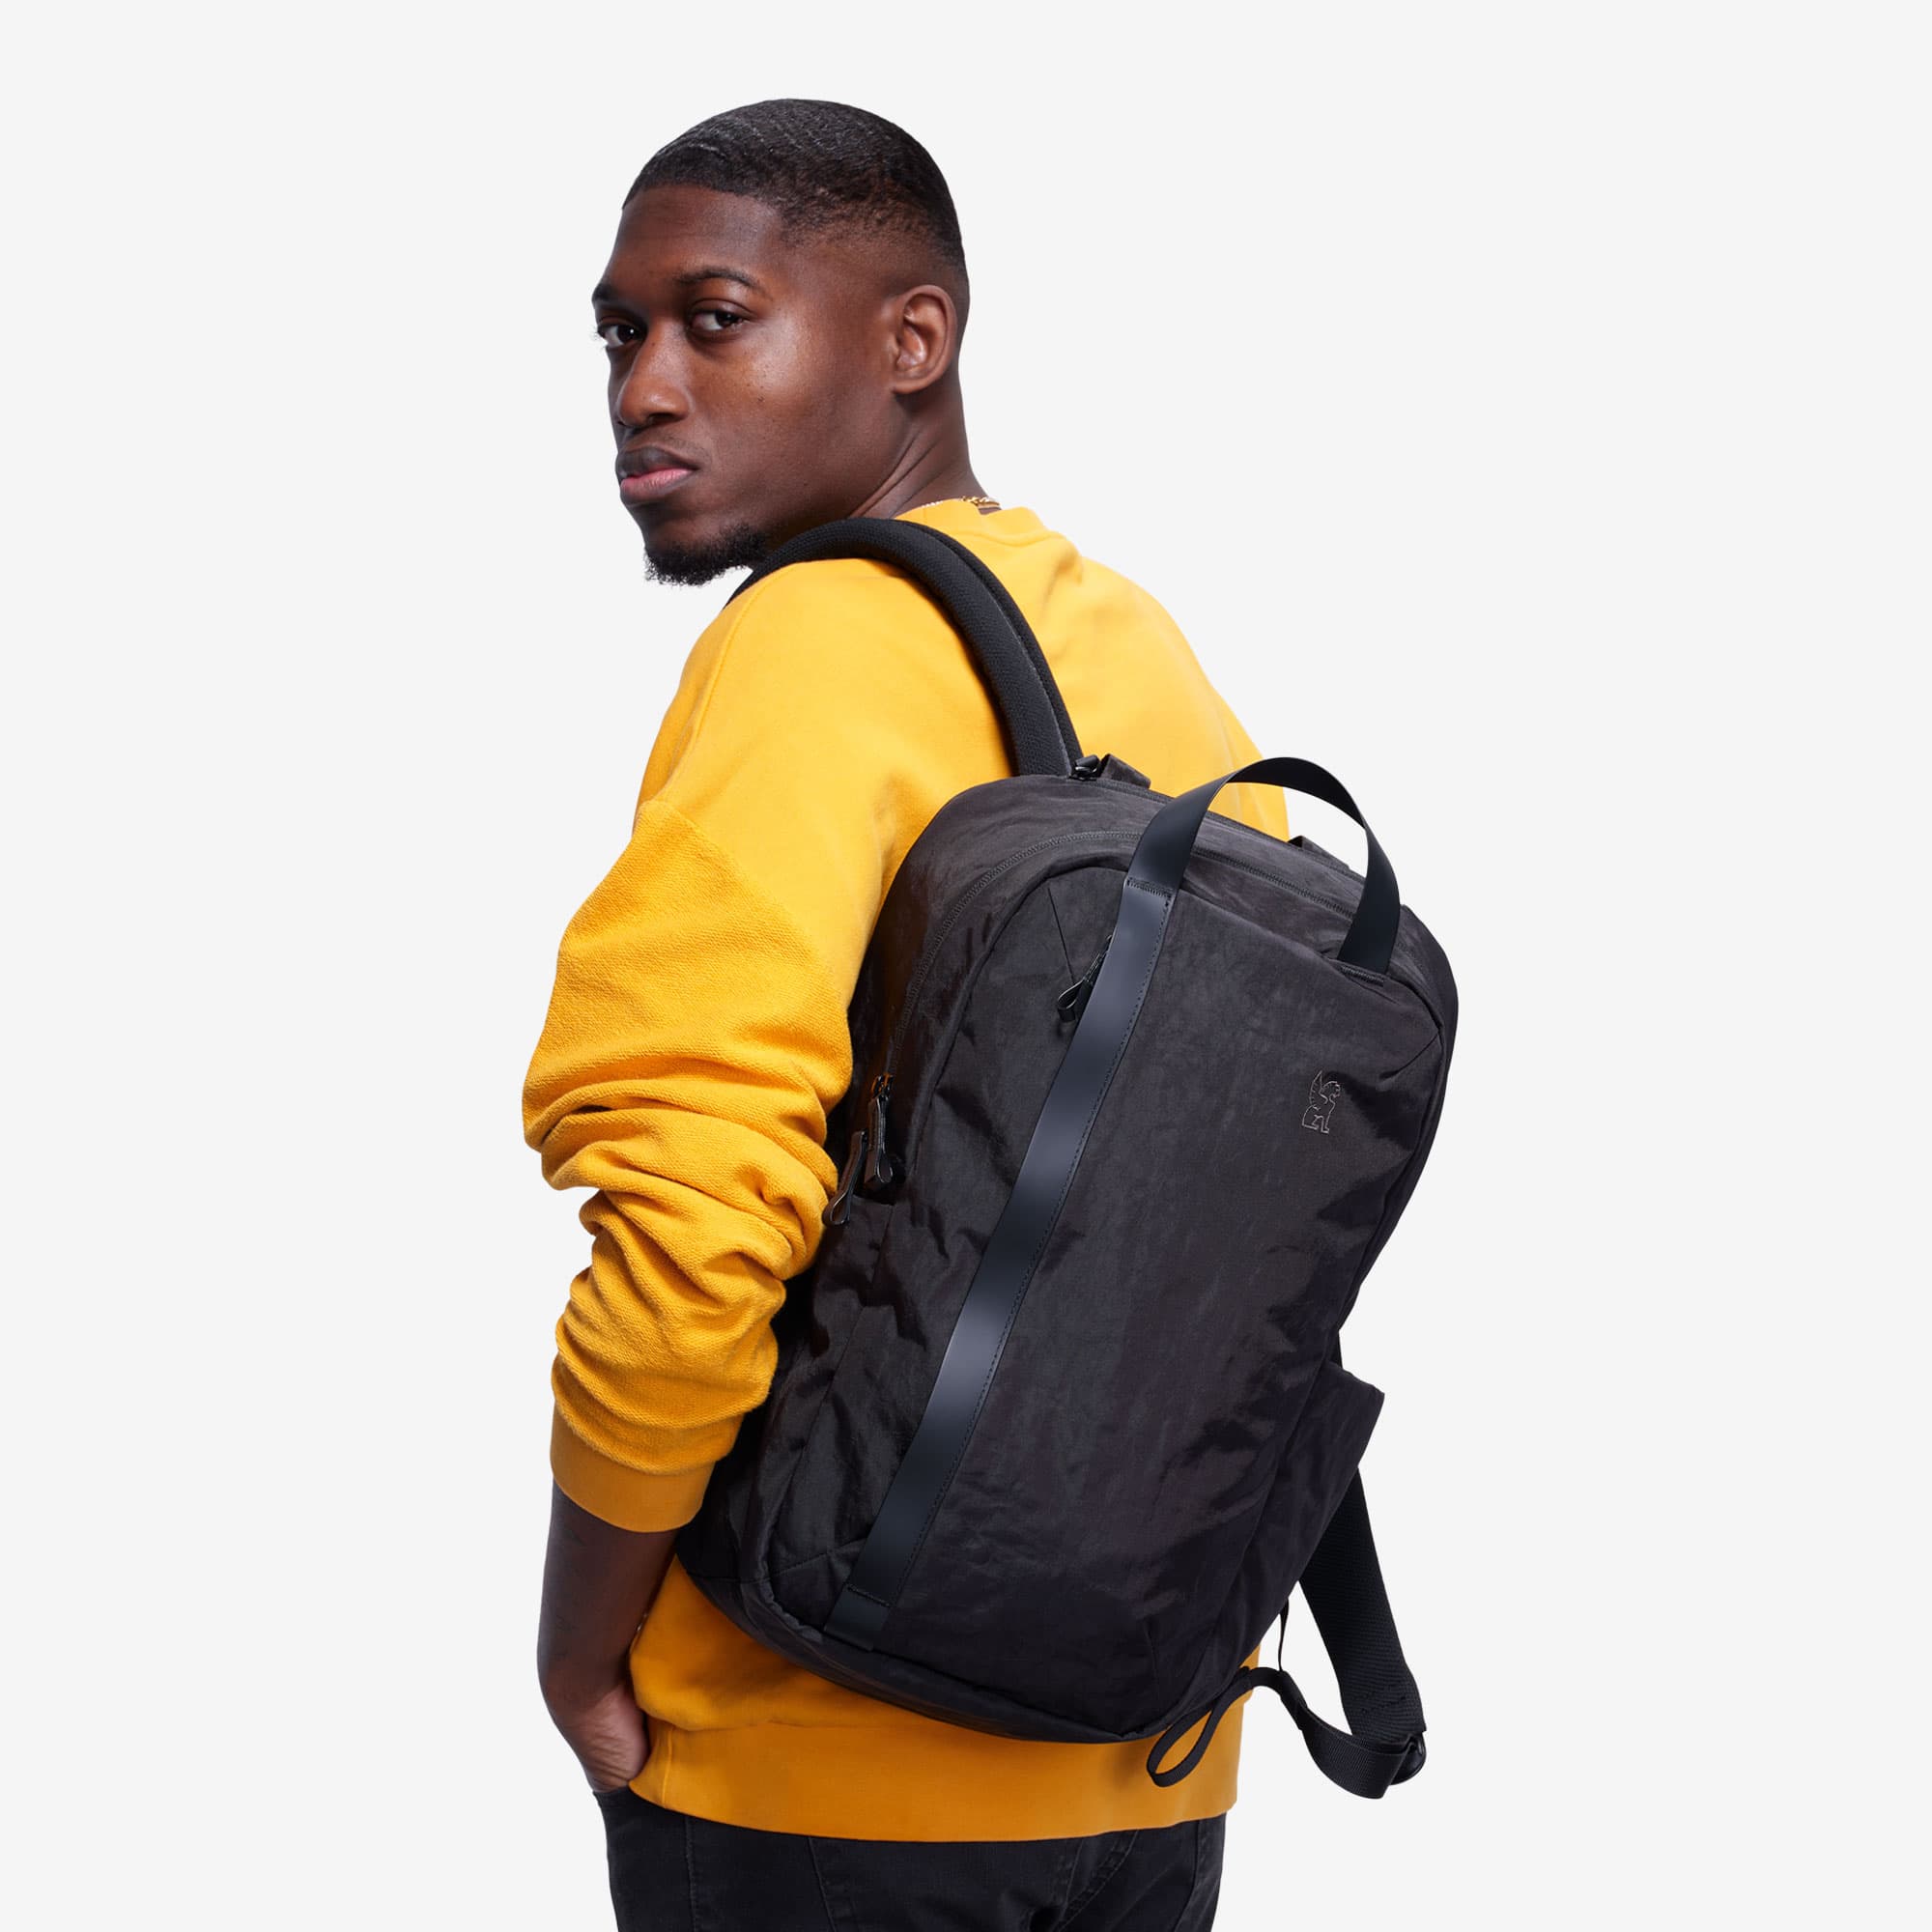 Man wearing the Highline backpack with one strap